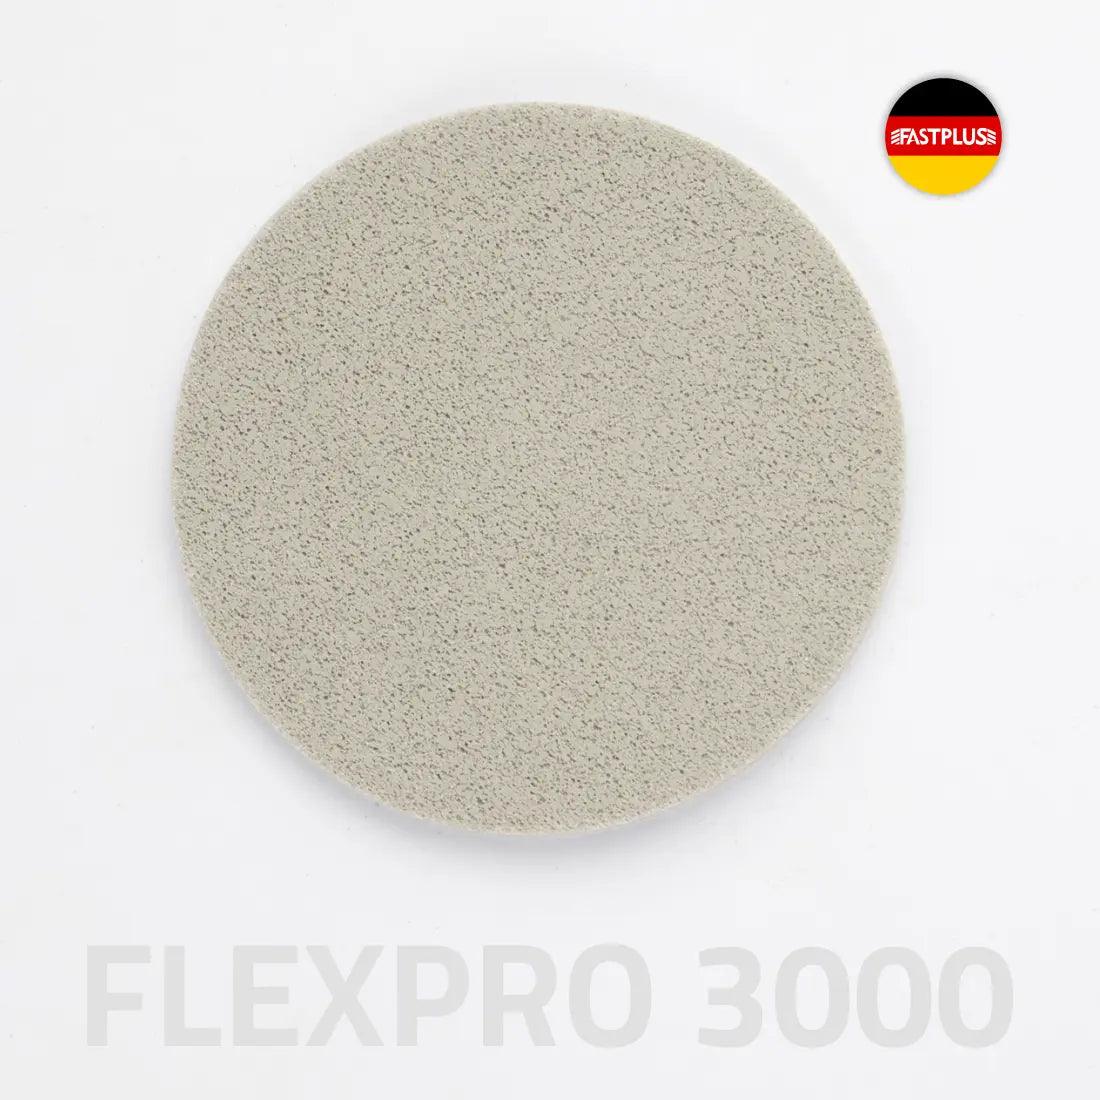 Flexpro Trizact Discs 75mm for car Finishing and Detailing by Fastplus